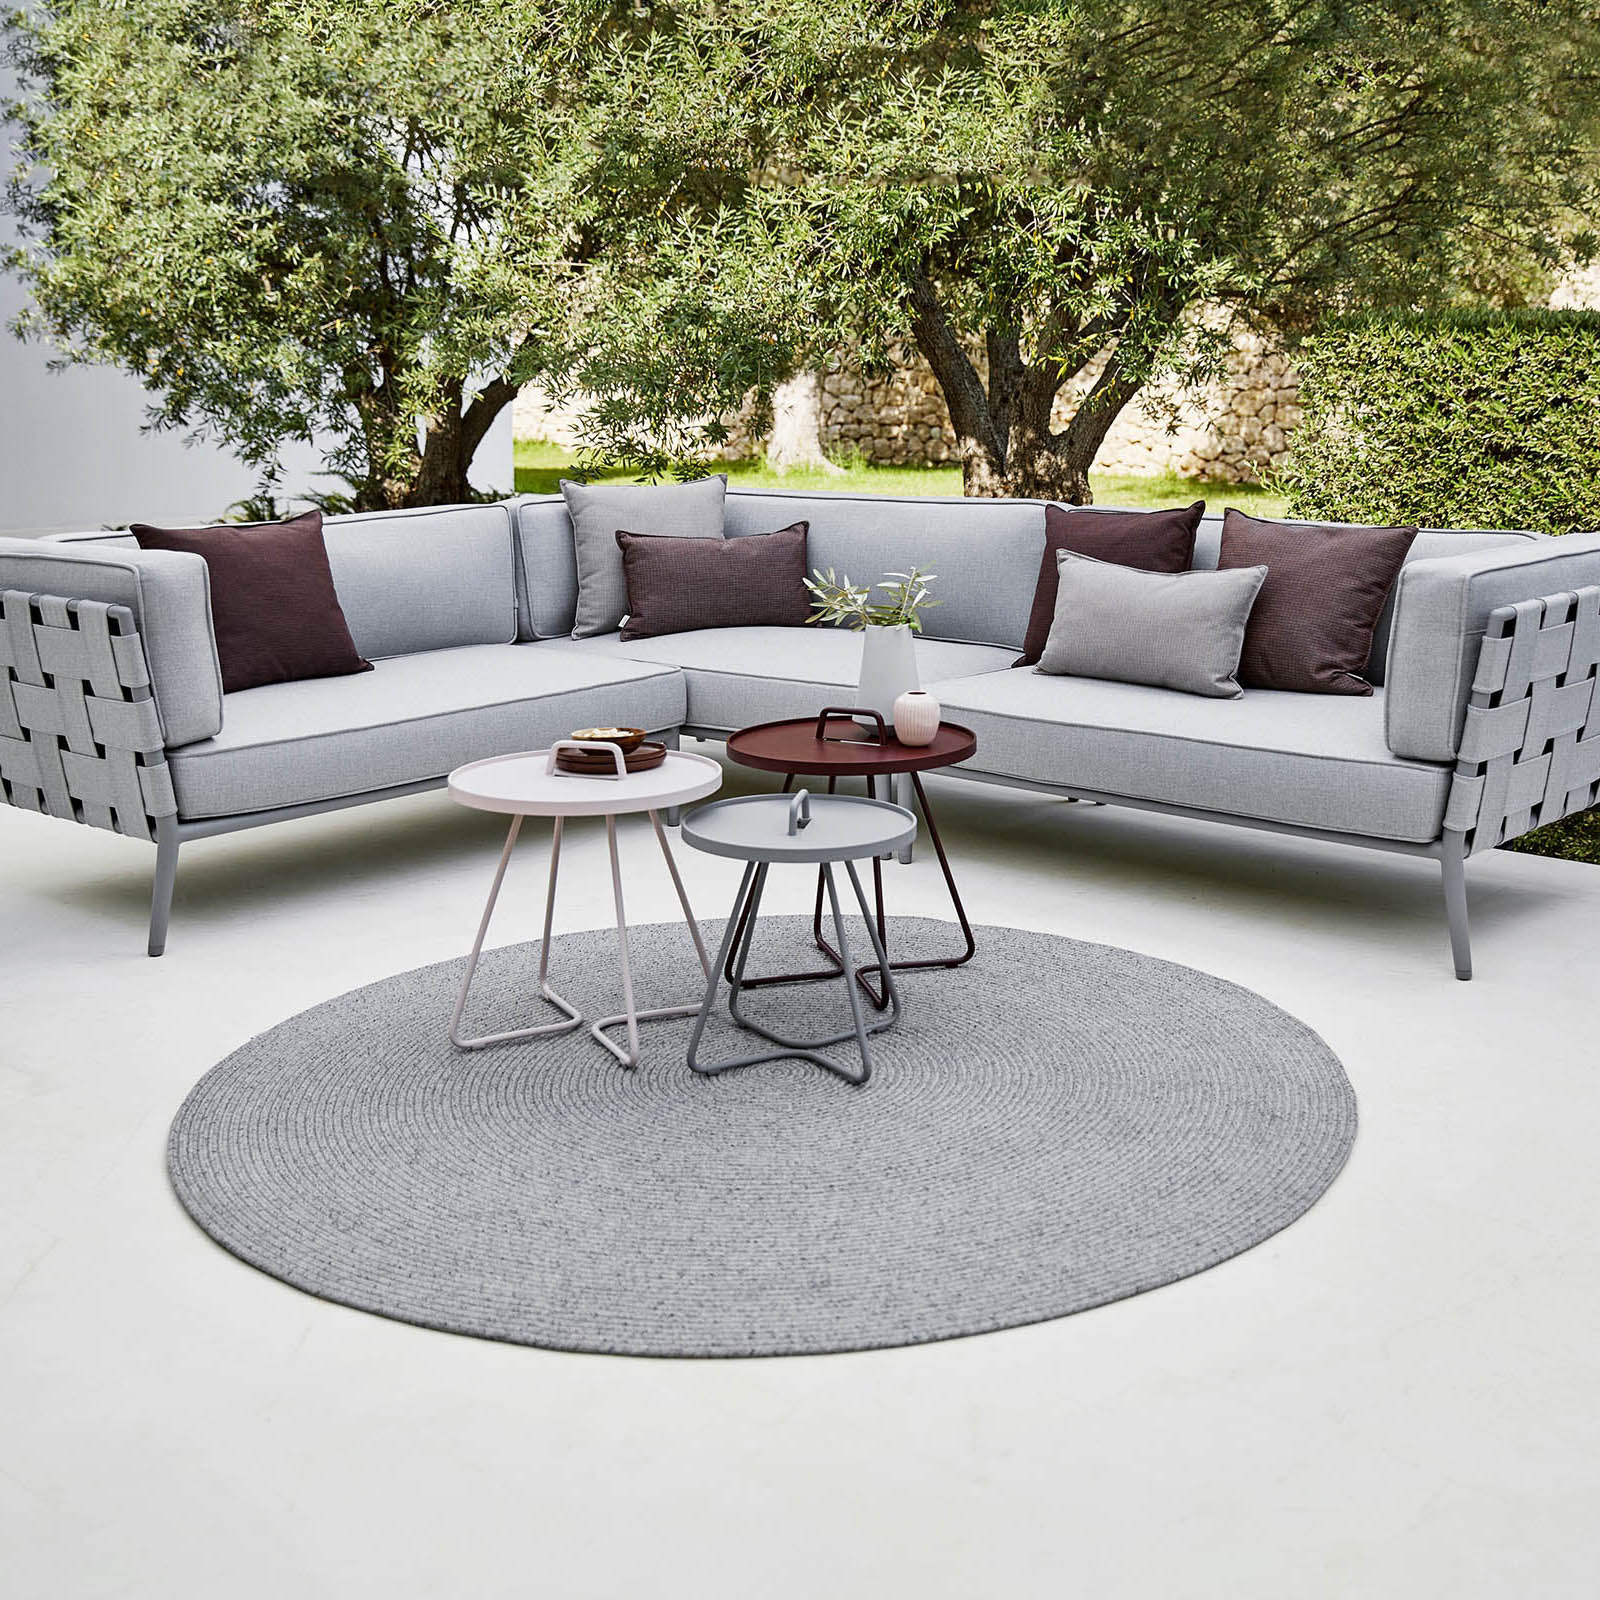 Conic 2-Sitzer Sofa-Modul rechts aus Cane-line AirTouch mit QuickDry in Grey